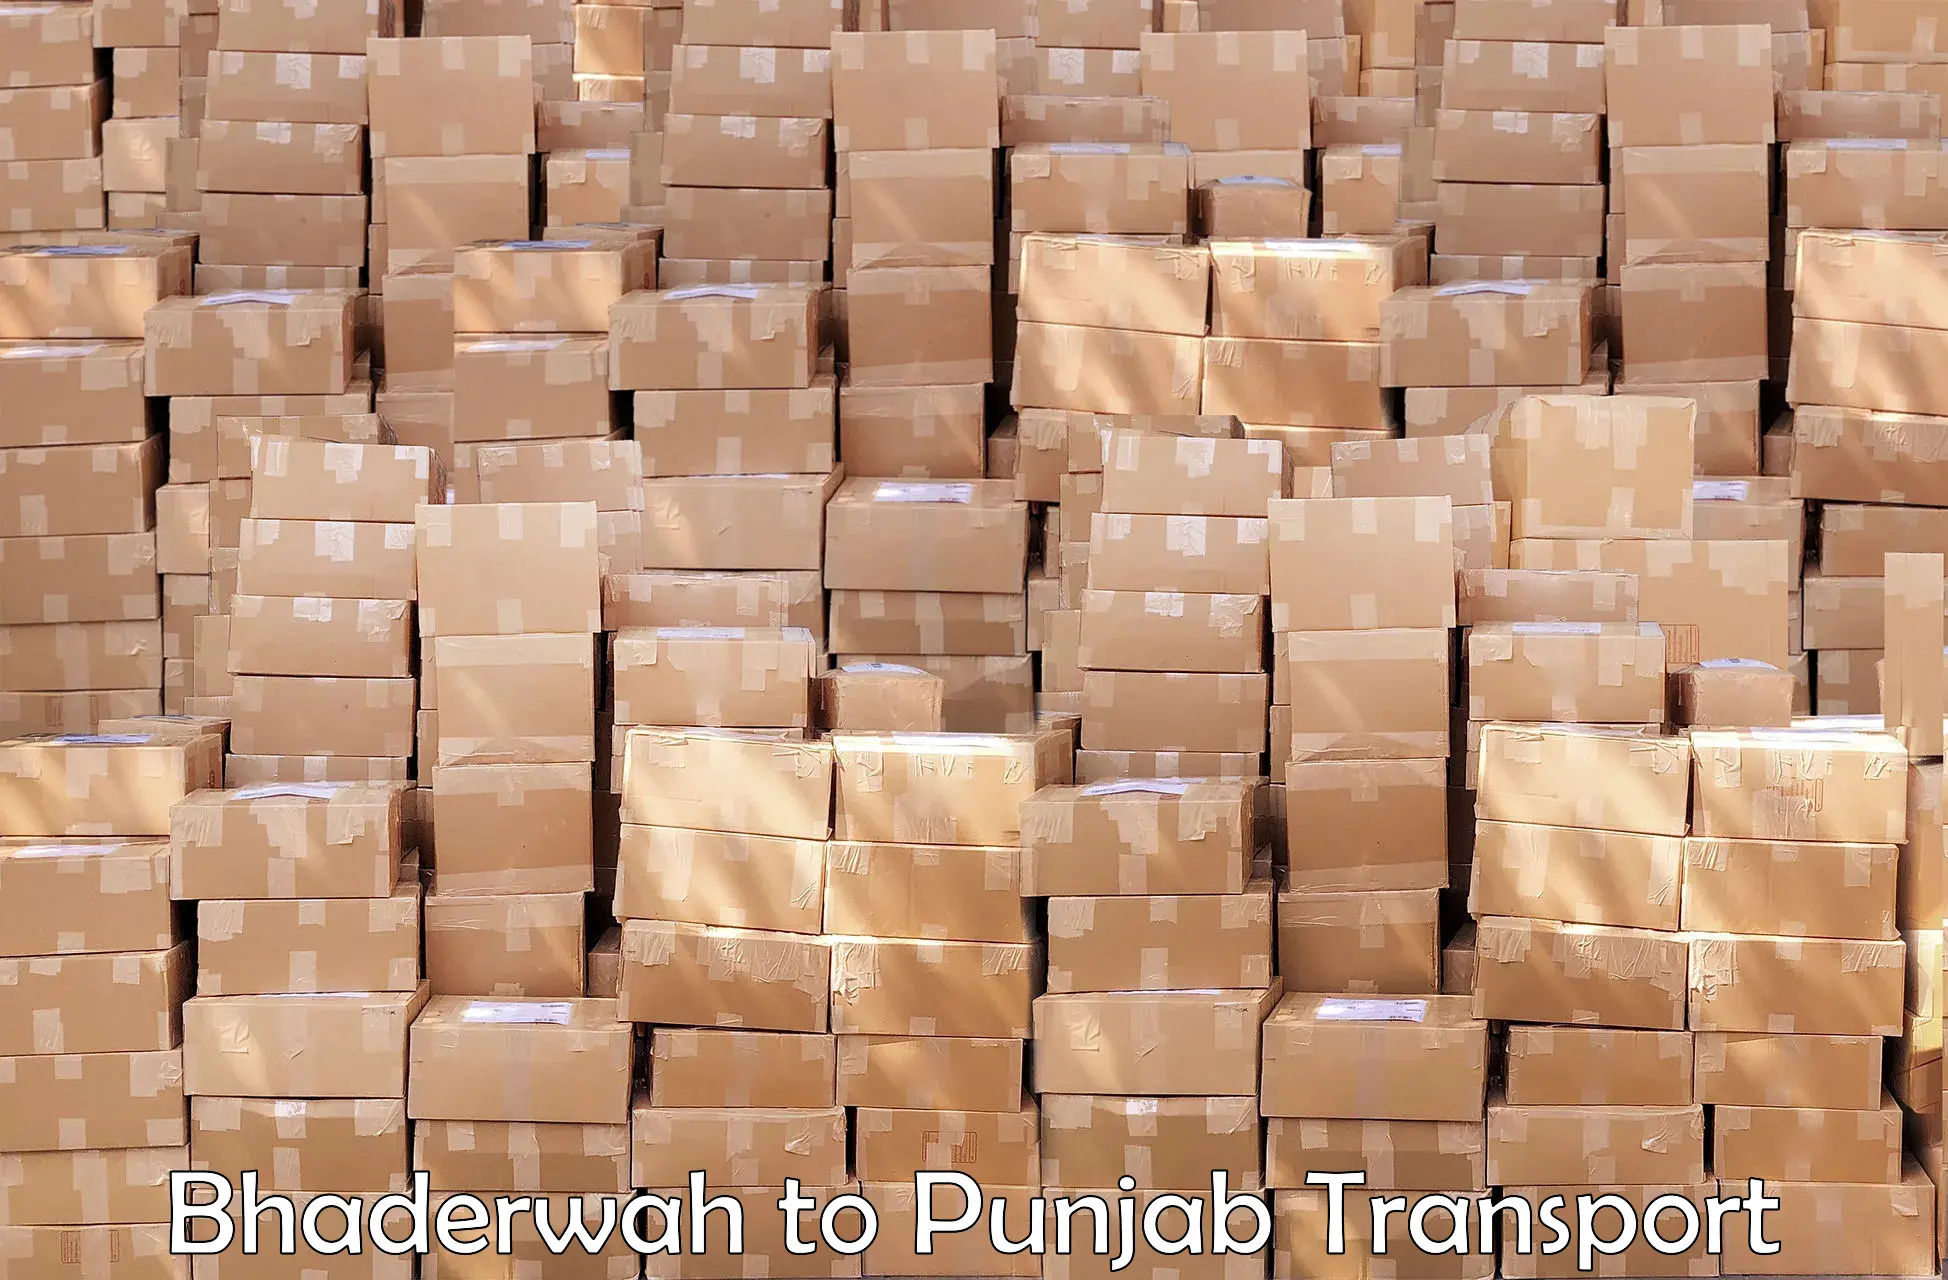 Truck transport companies in India Bhaderwah to Amritsar